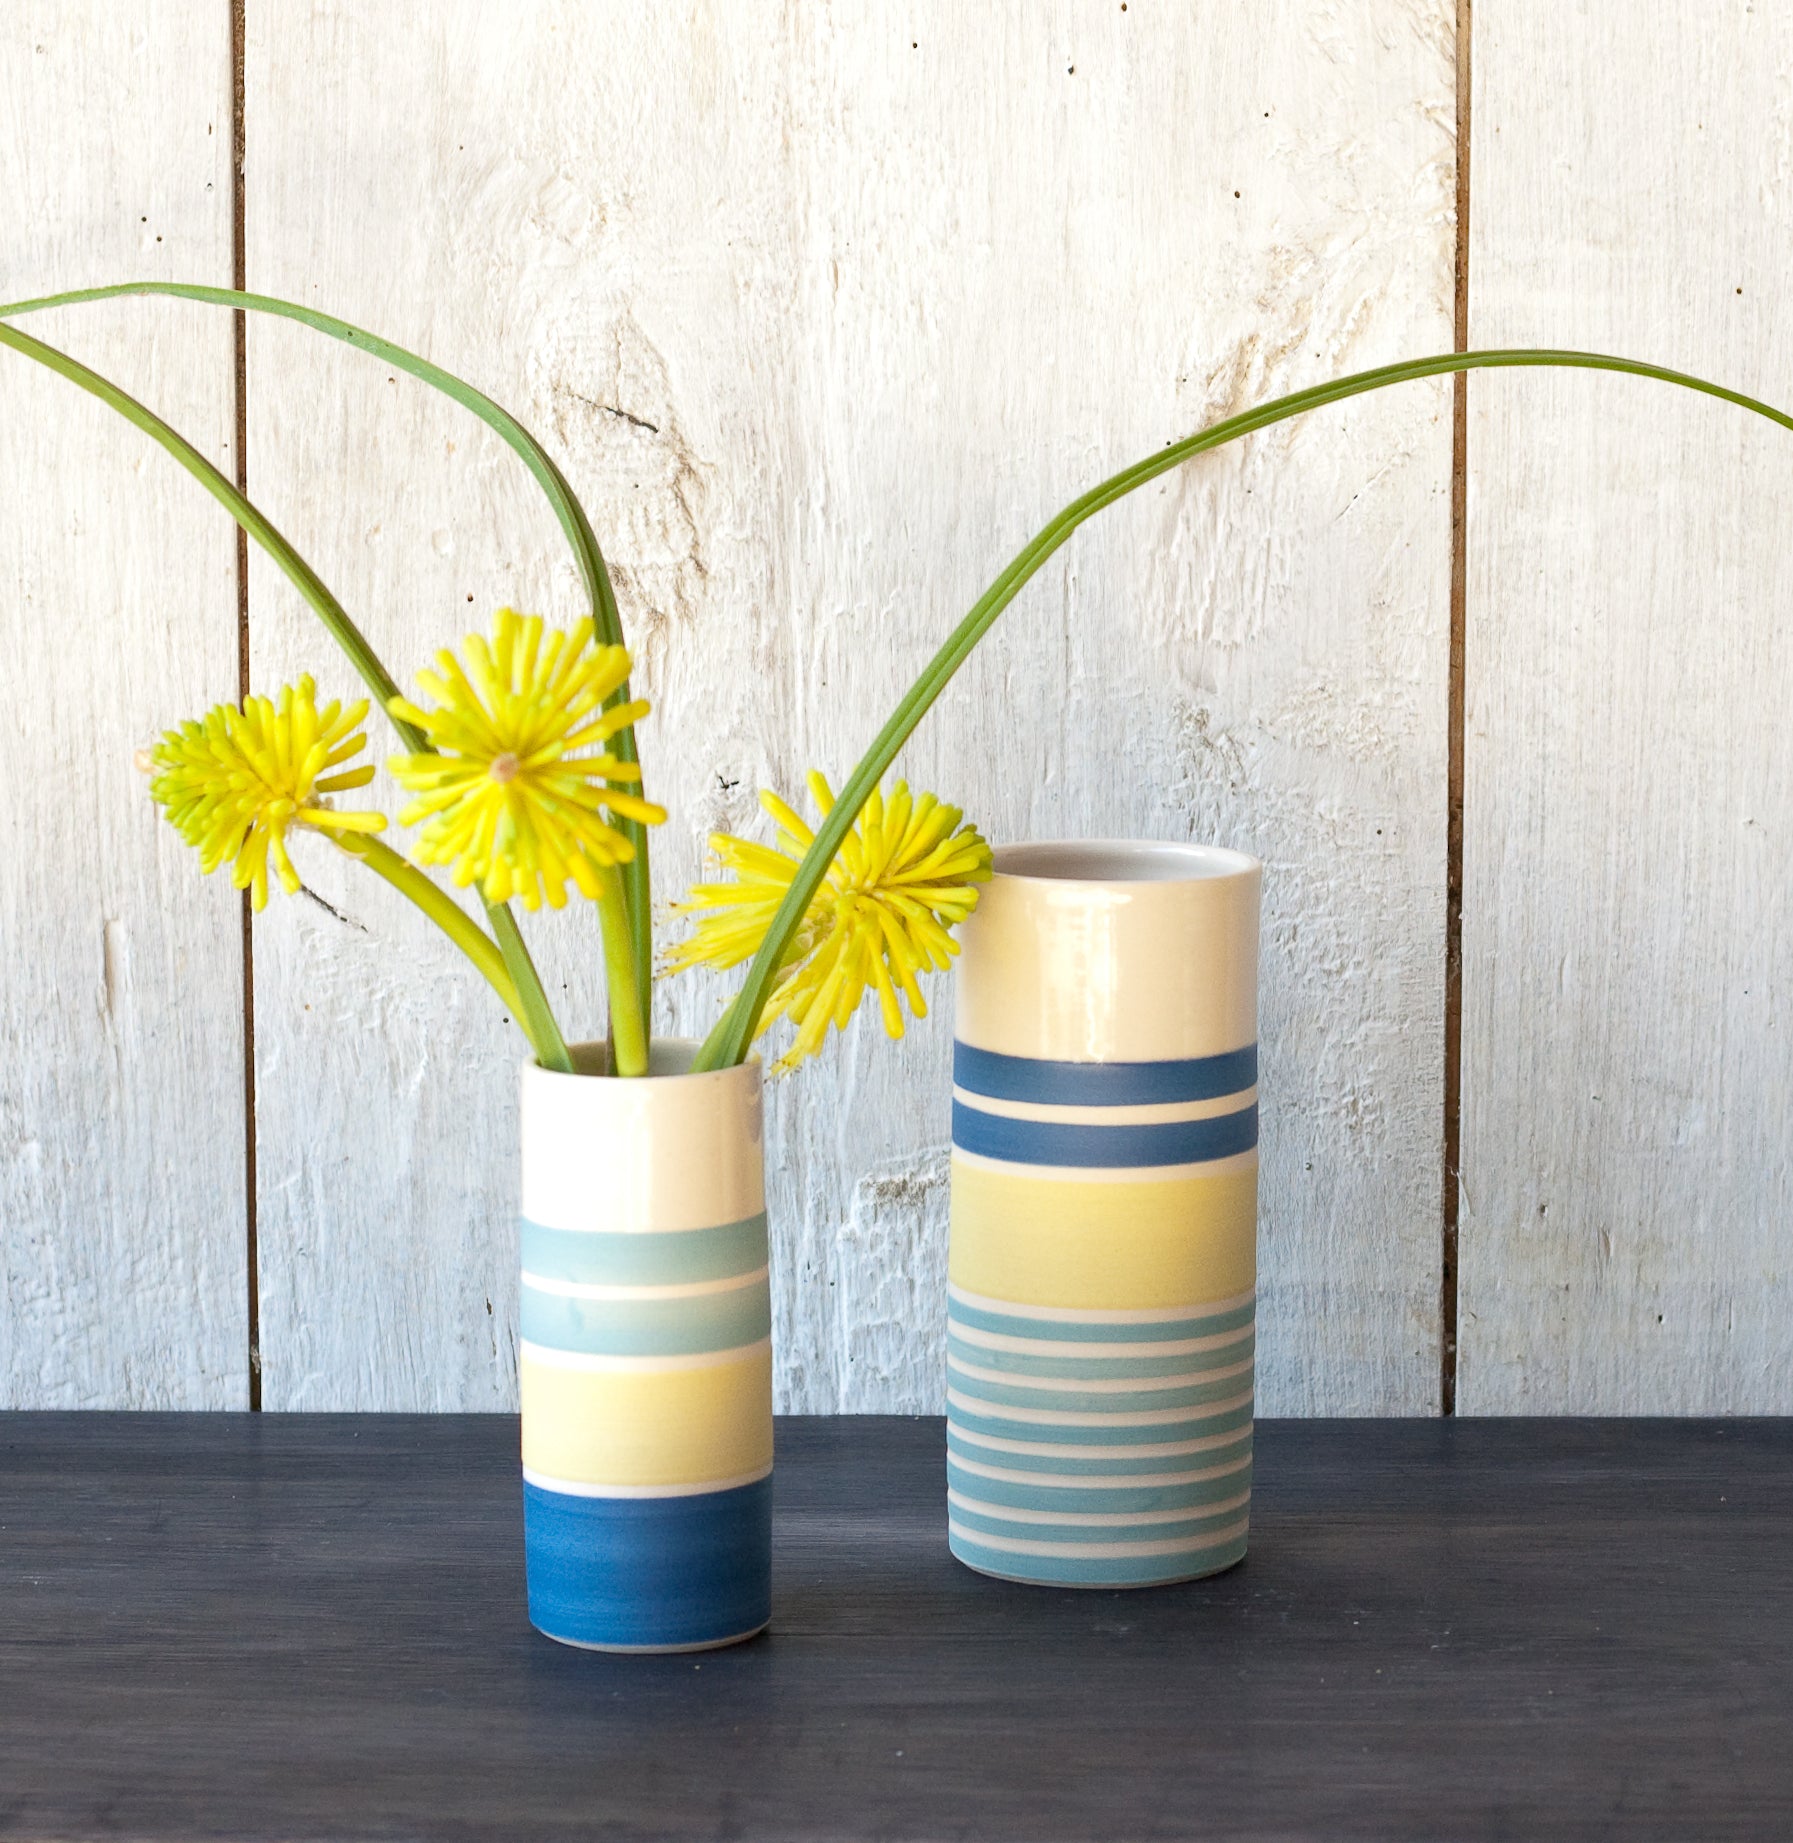 Spring flowers and Vases